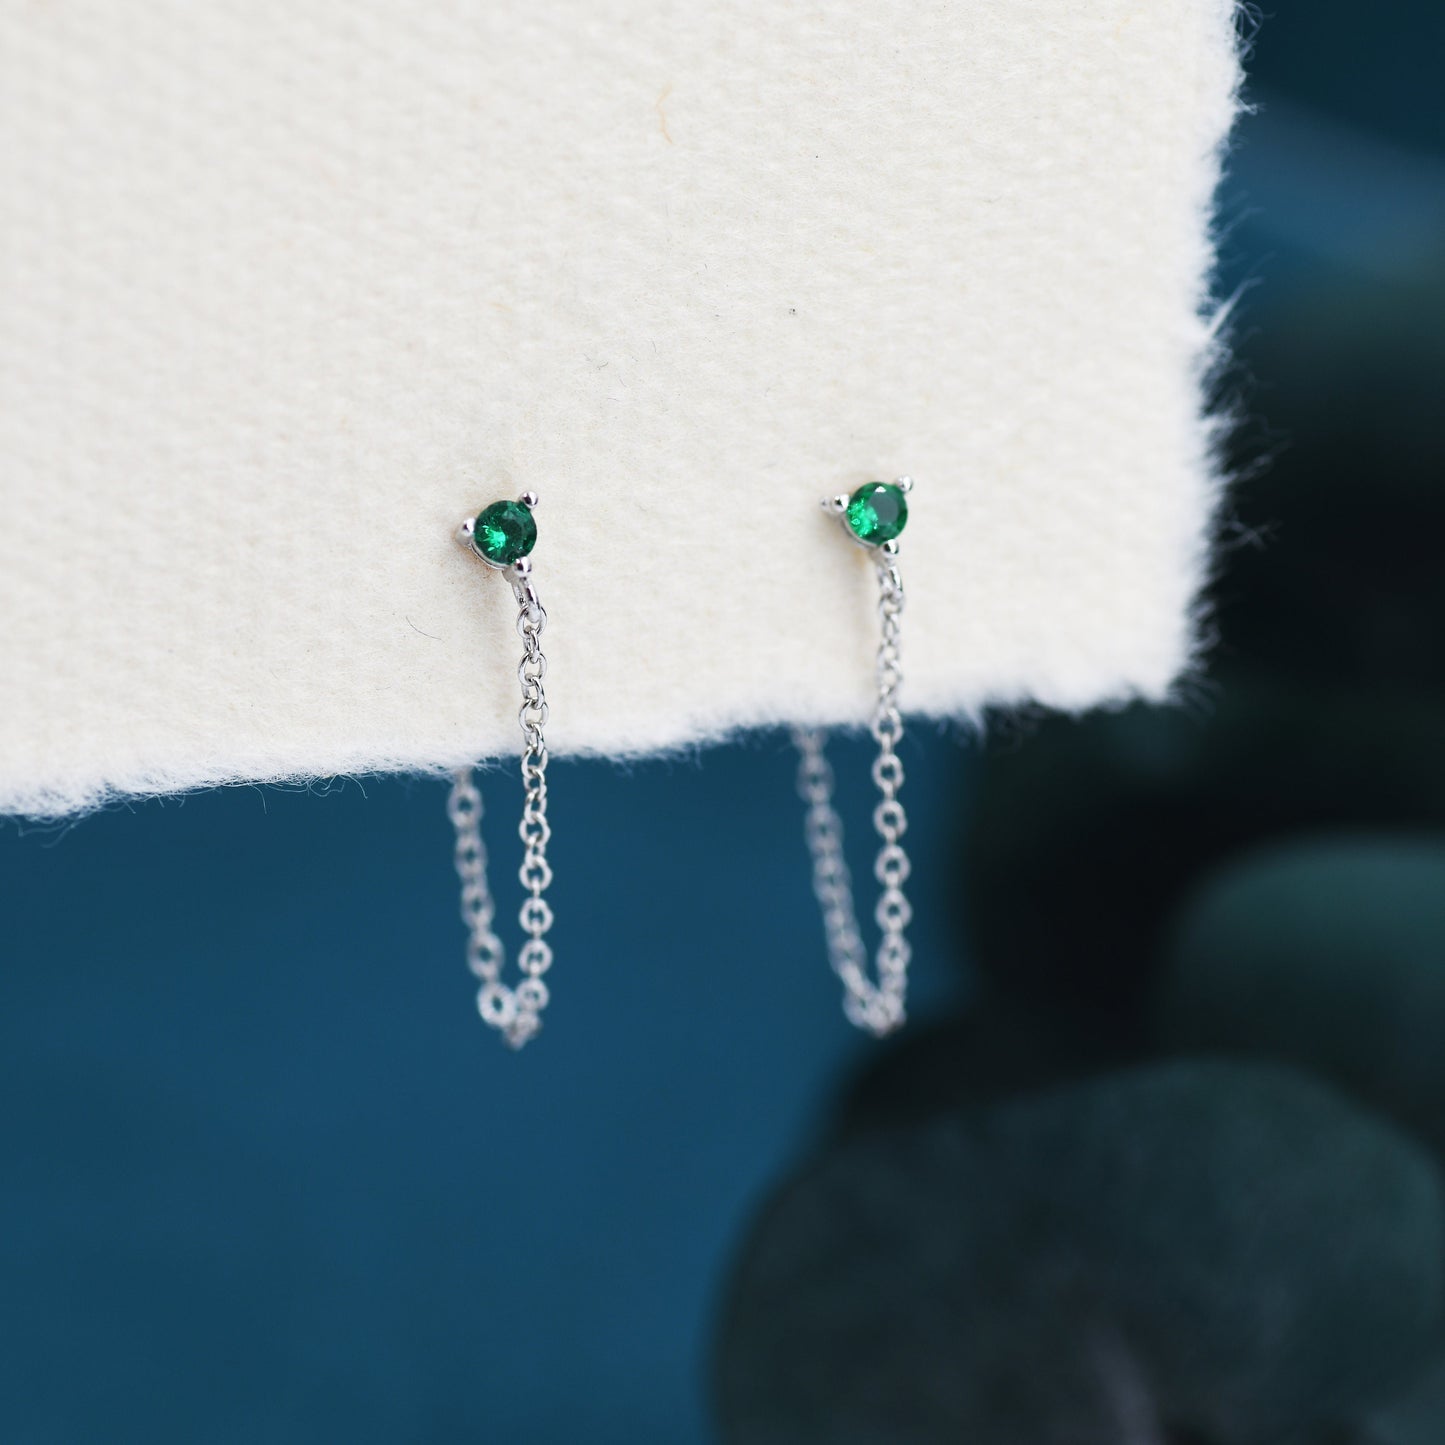 Emerald Green CZ and Chain Ear Jacket in Sterling Silver,  Silver or Gold, Front and Back Earrings, Two Part Earrings, CZ with Linking Chain